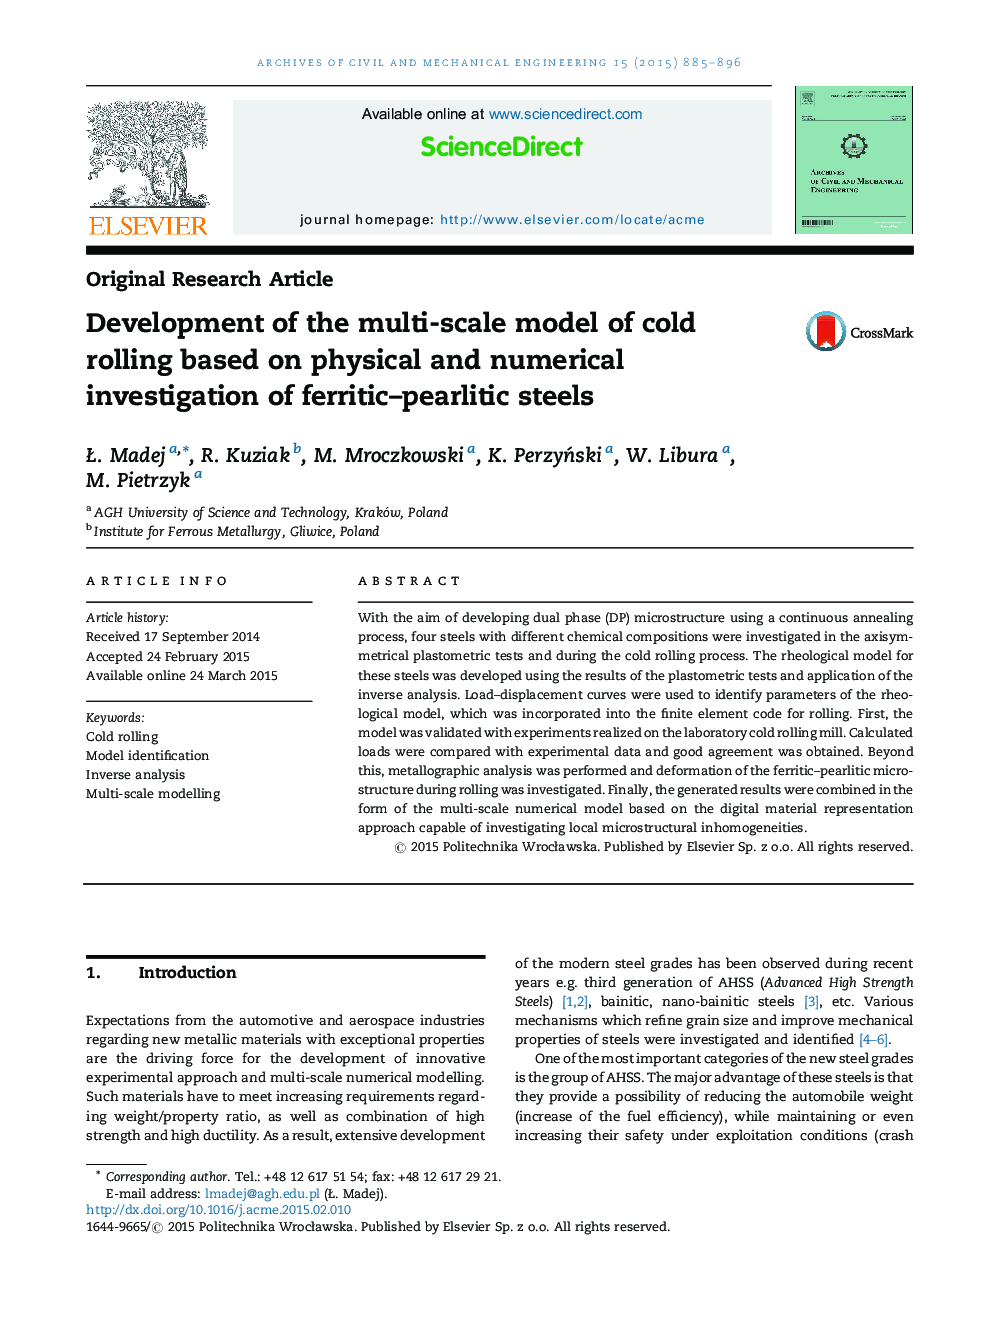 Development of the multi-scale model of cold rolling based on physical and numerical investigation of ferritic–pearlitic steels